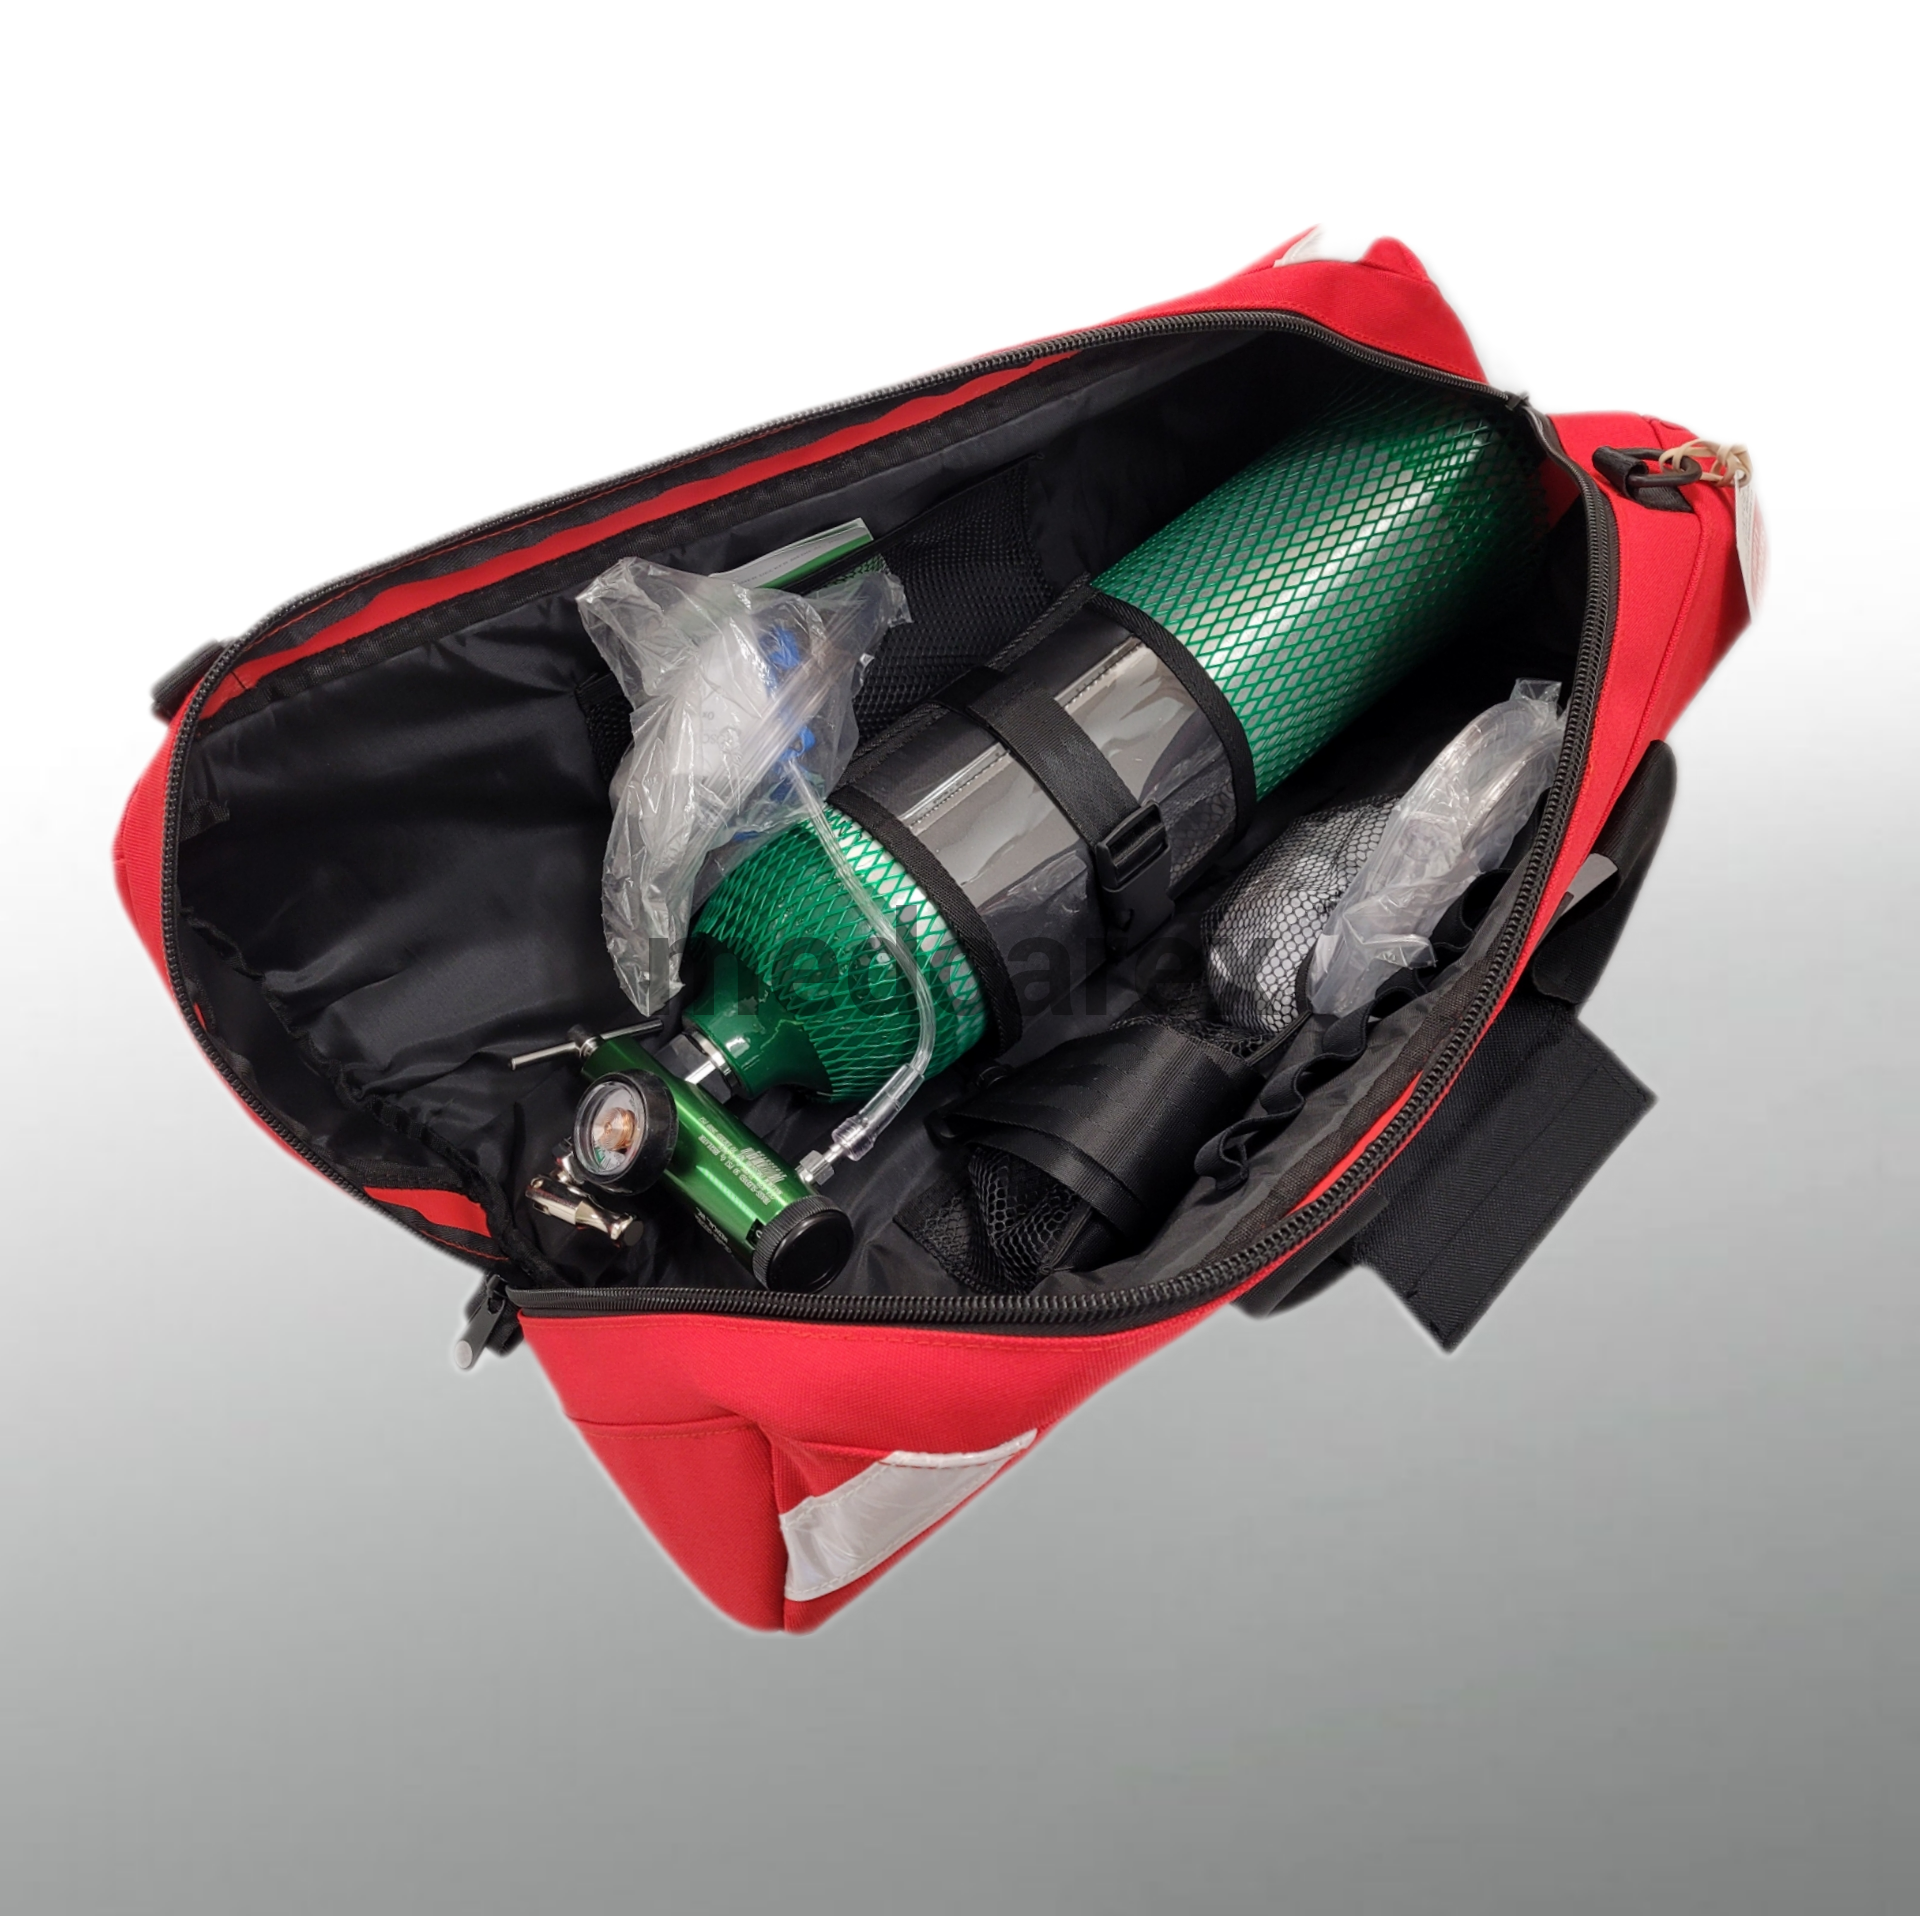 Oxygen tank kit with D cylinder